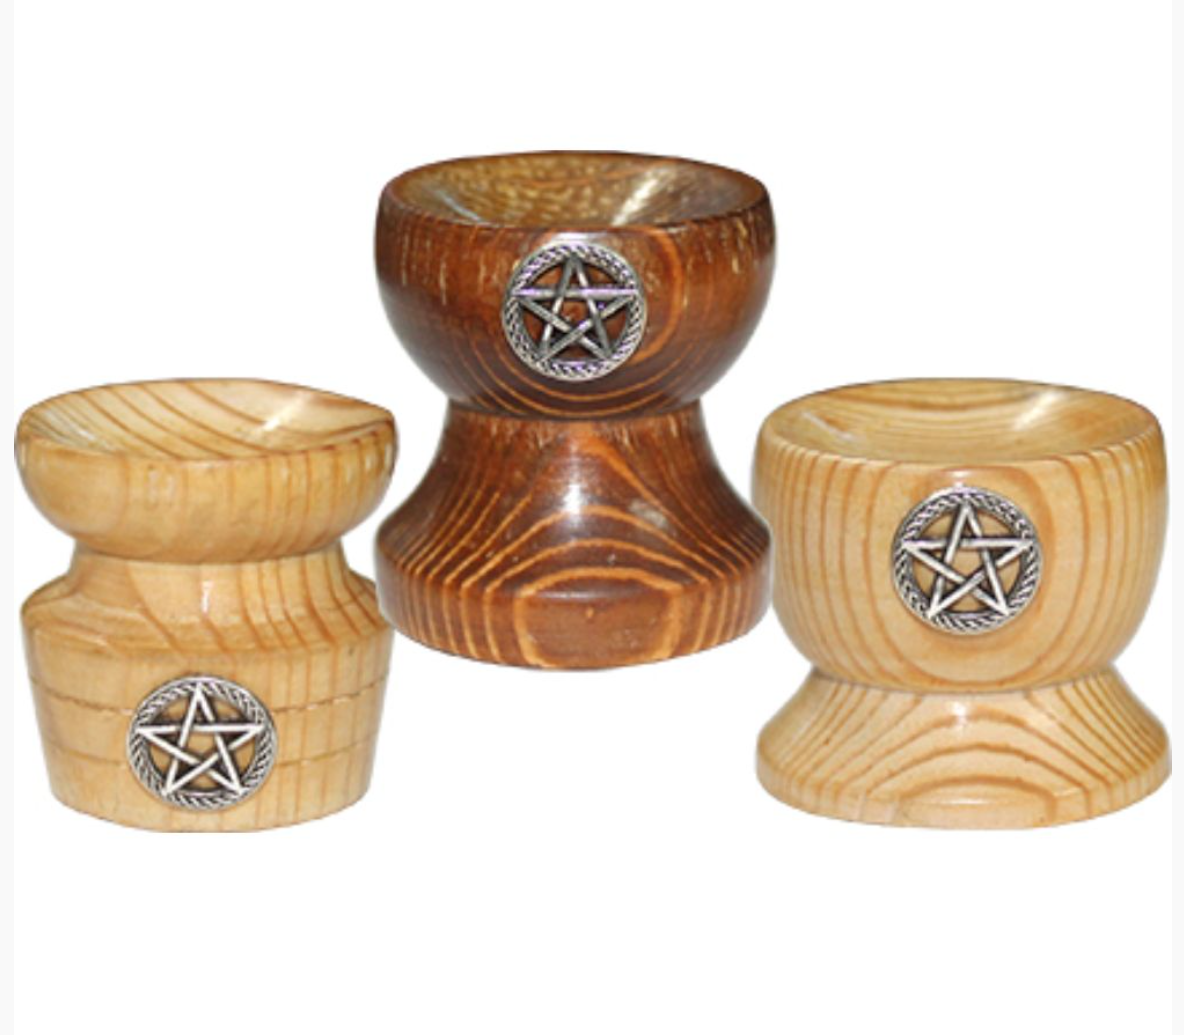 SPHERE STAND - Wood with Pentacle Inlay （set of 3）